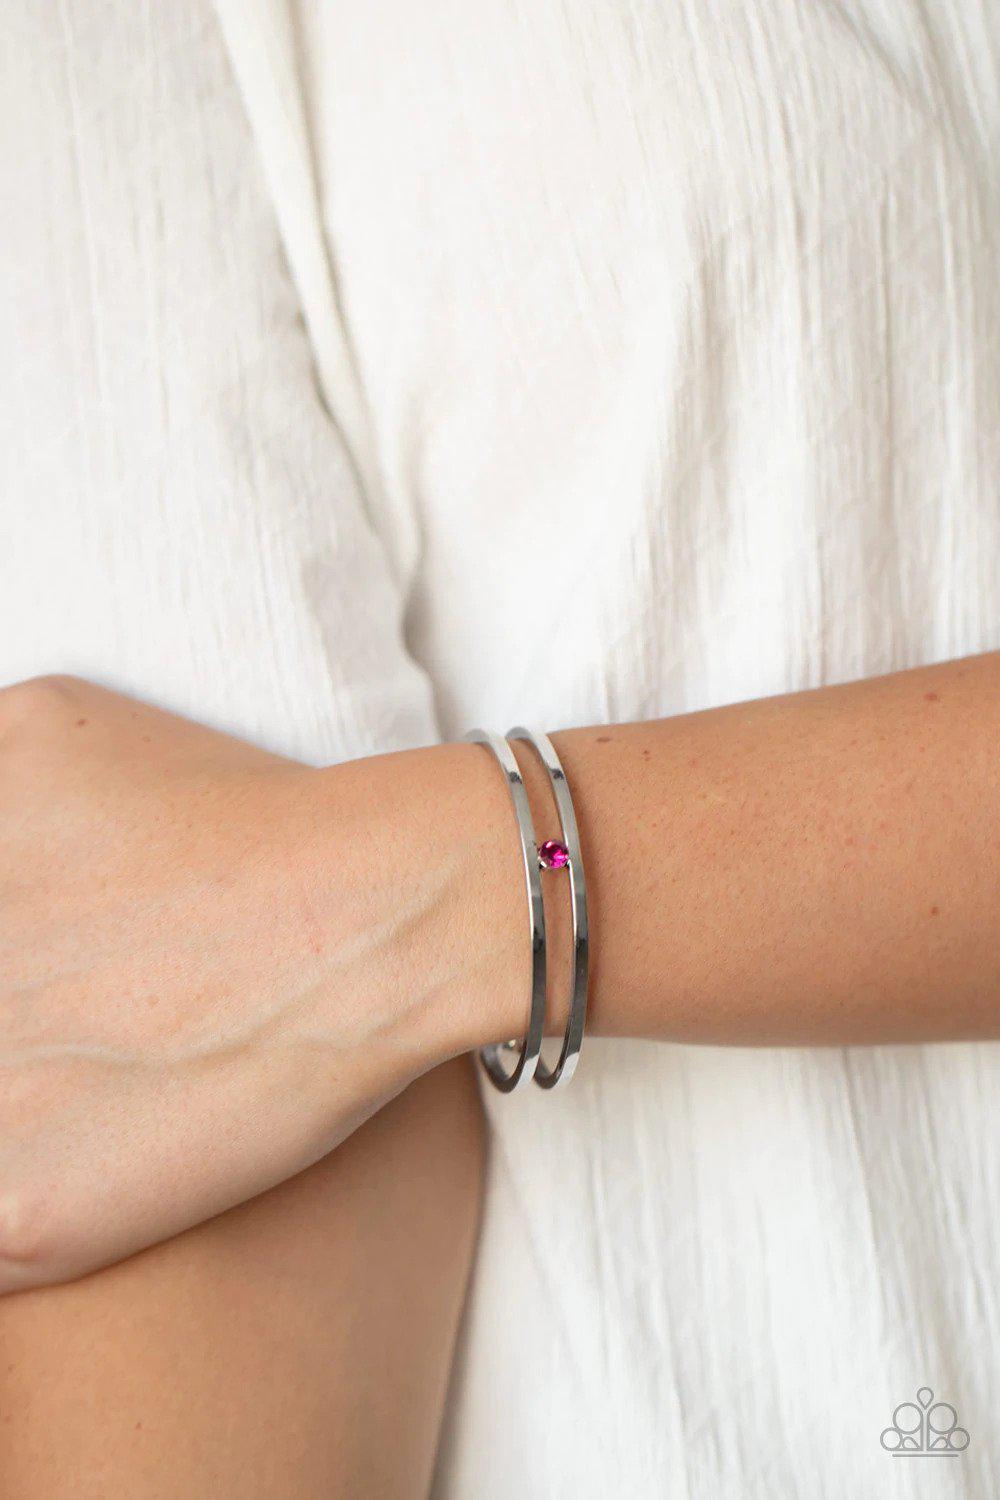 Solo Artist Pink and Silver Cuff Bracelet - Paparazzi Accessories-on model - CarasShop.com - $5 Jewelry by Cara Jewels